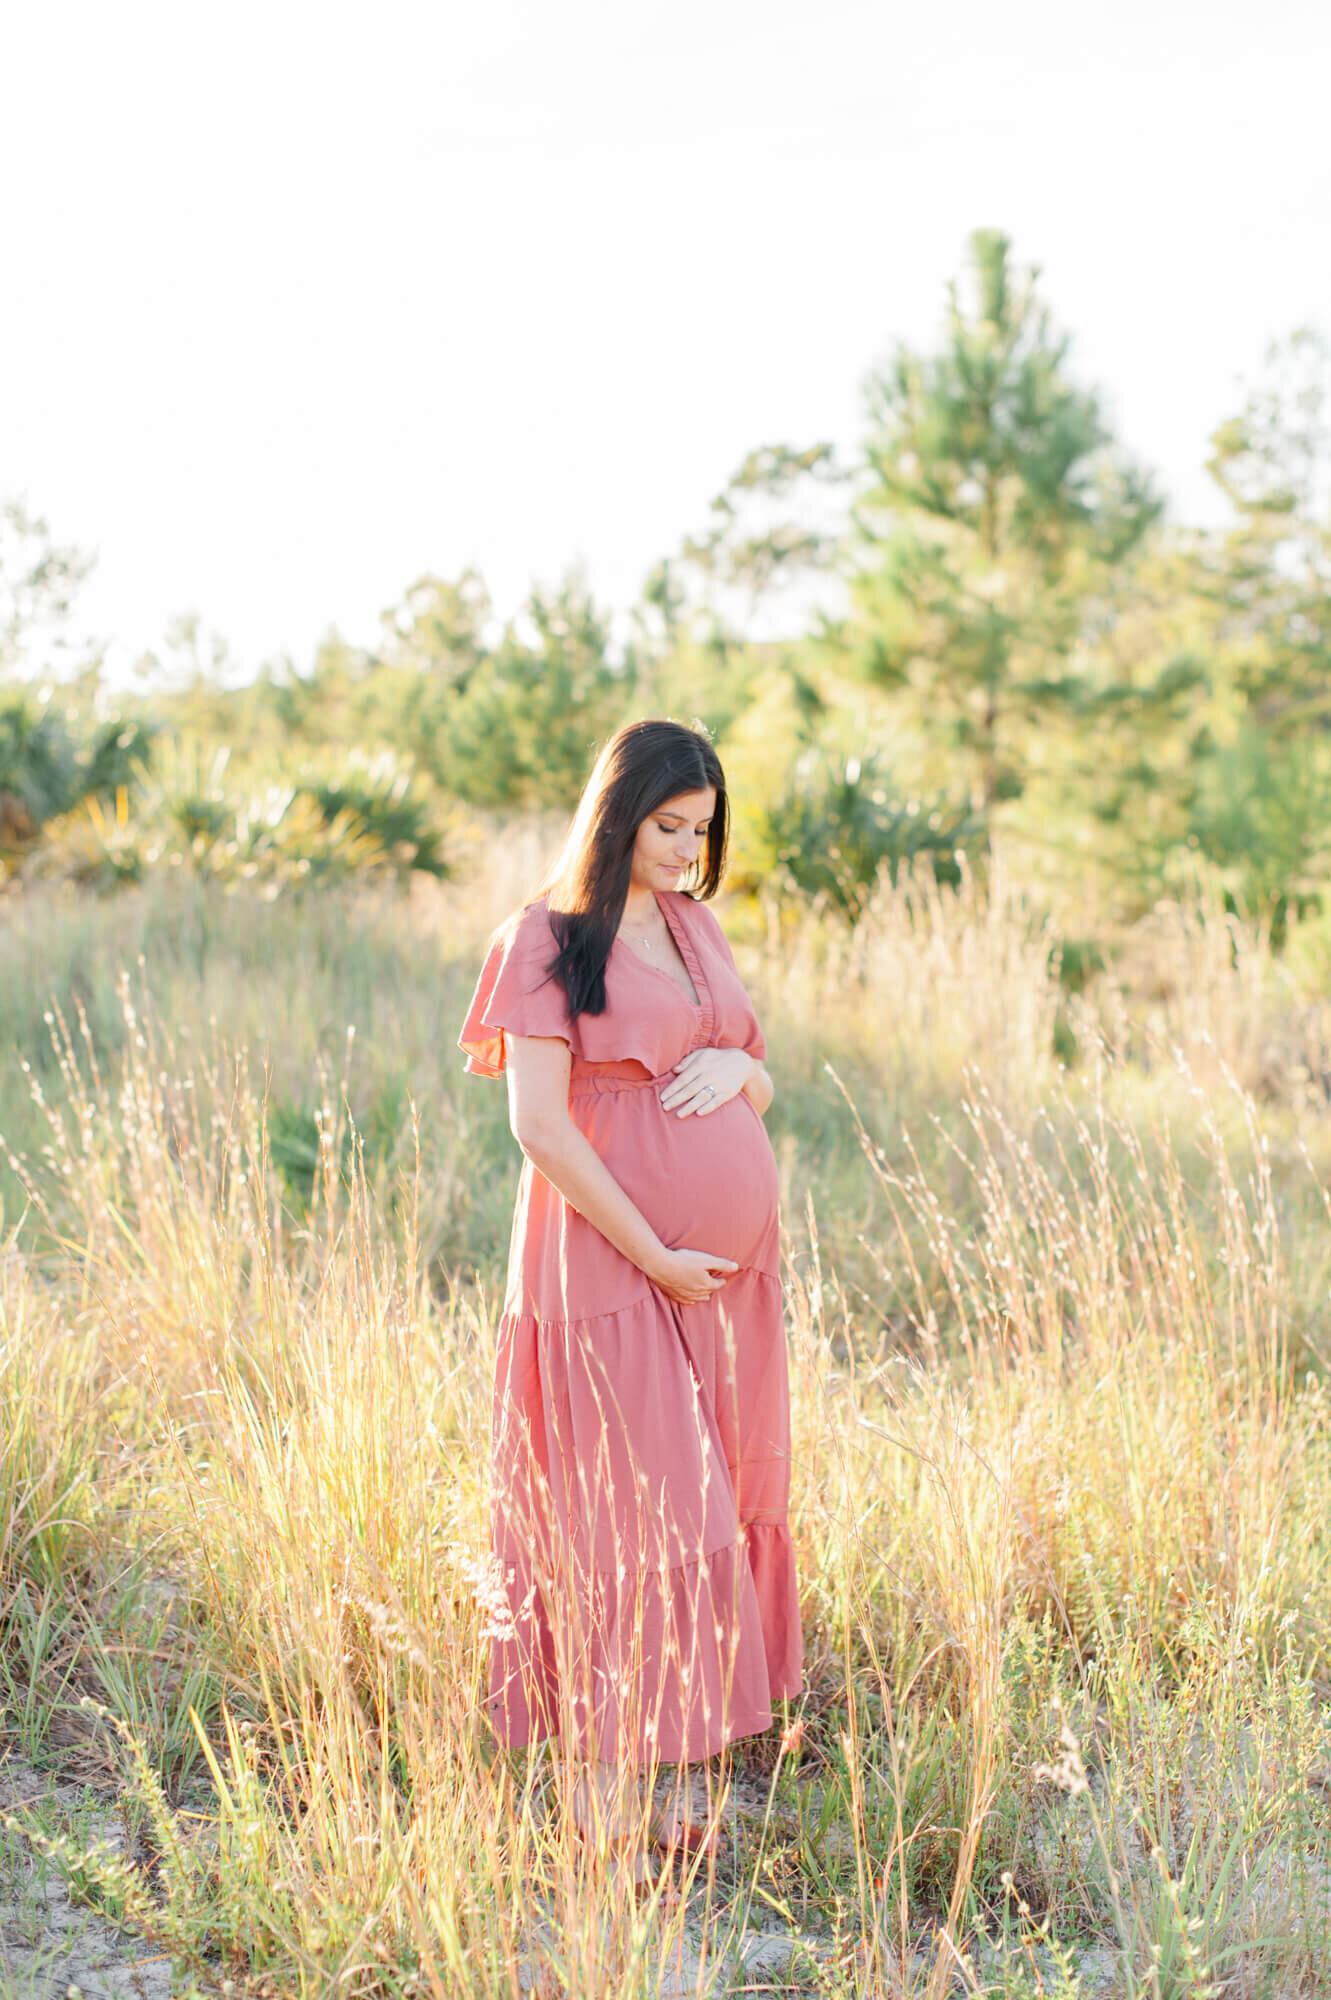 Expectant mother stands in a tall grass field holding her belly wearing a pink dress